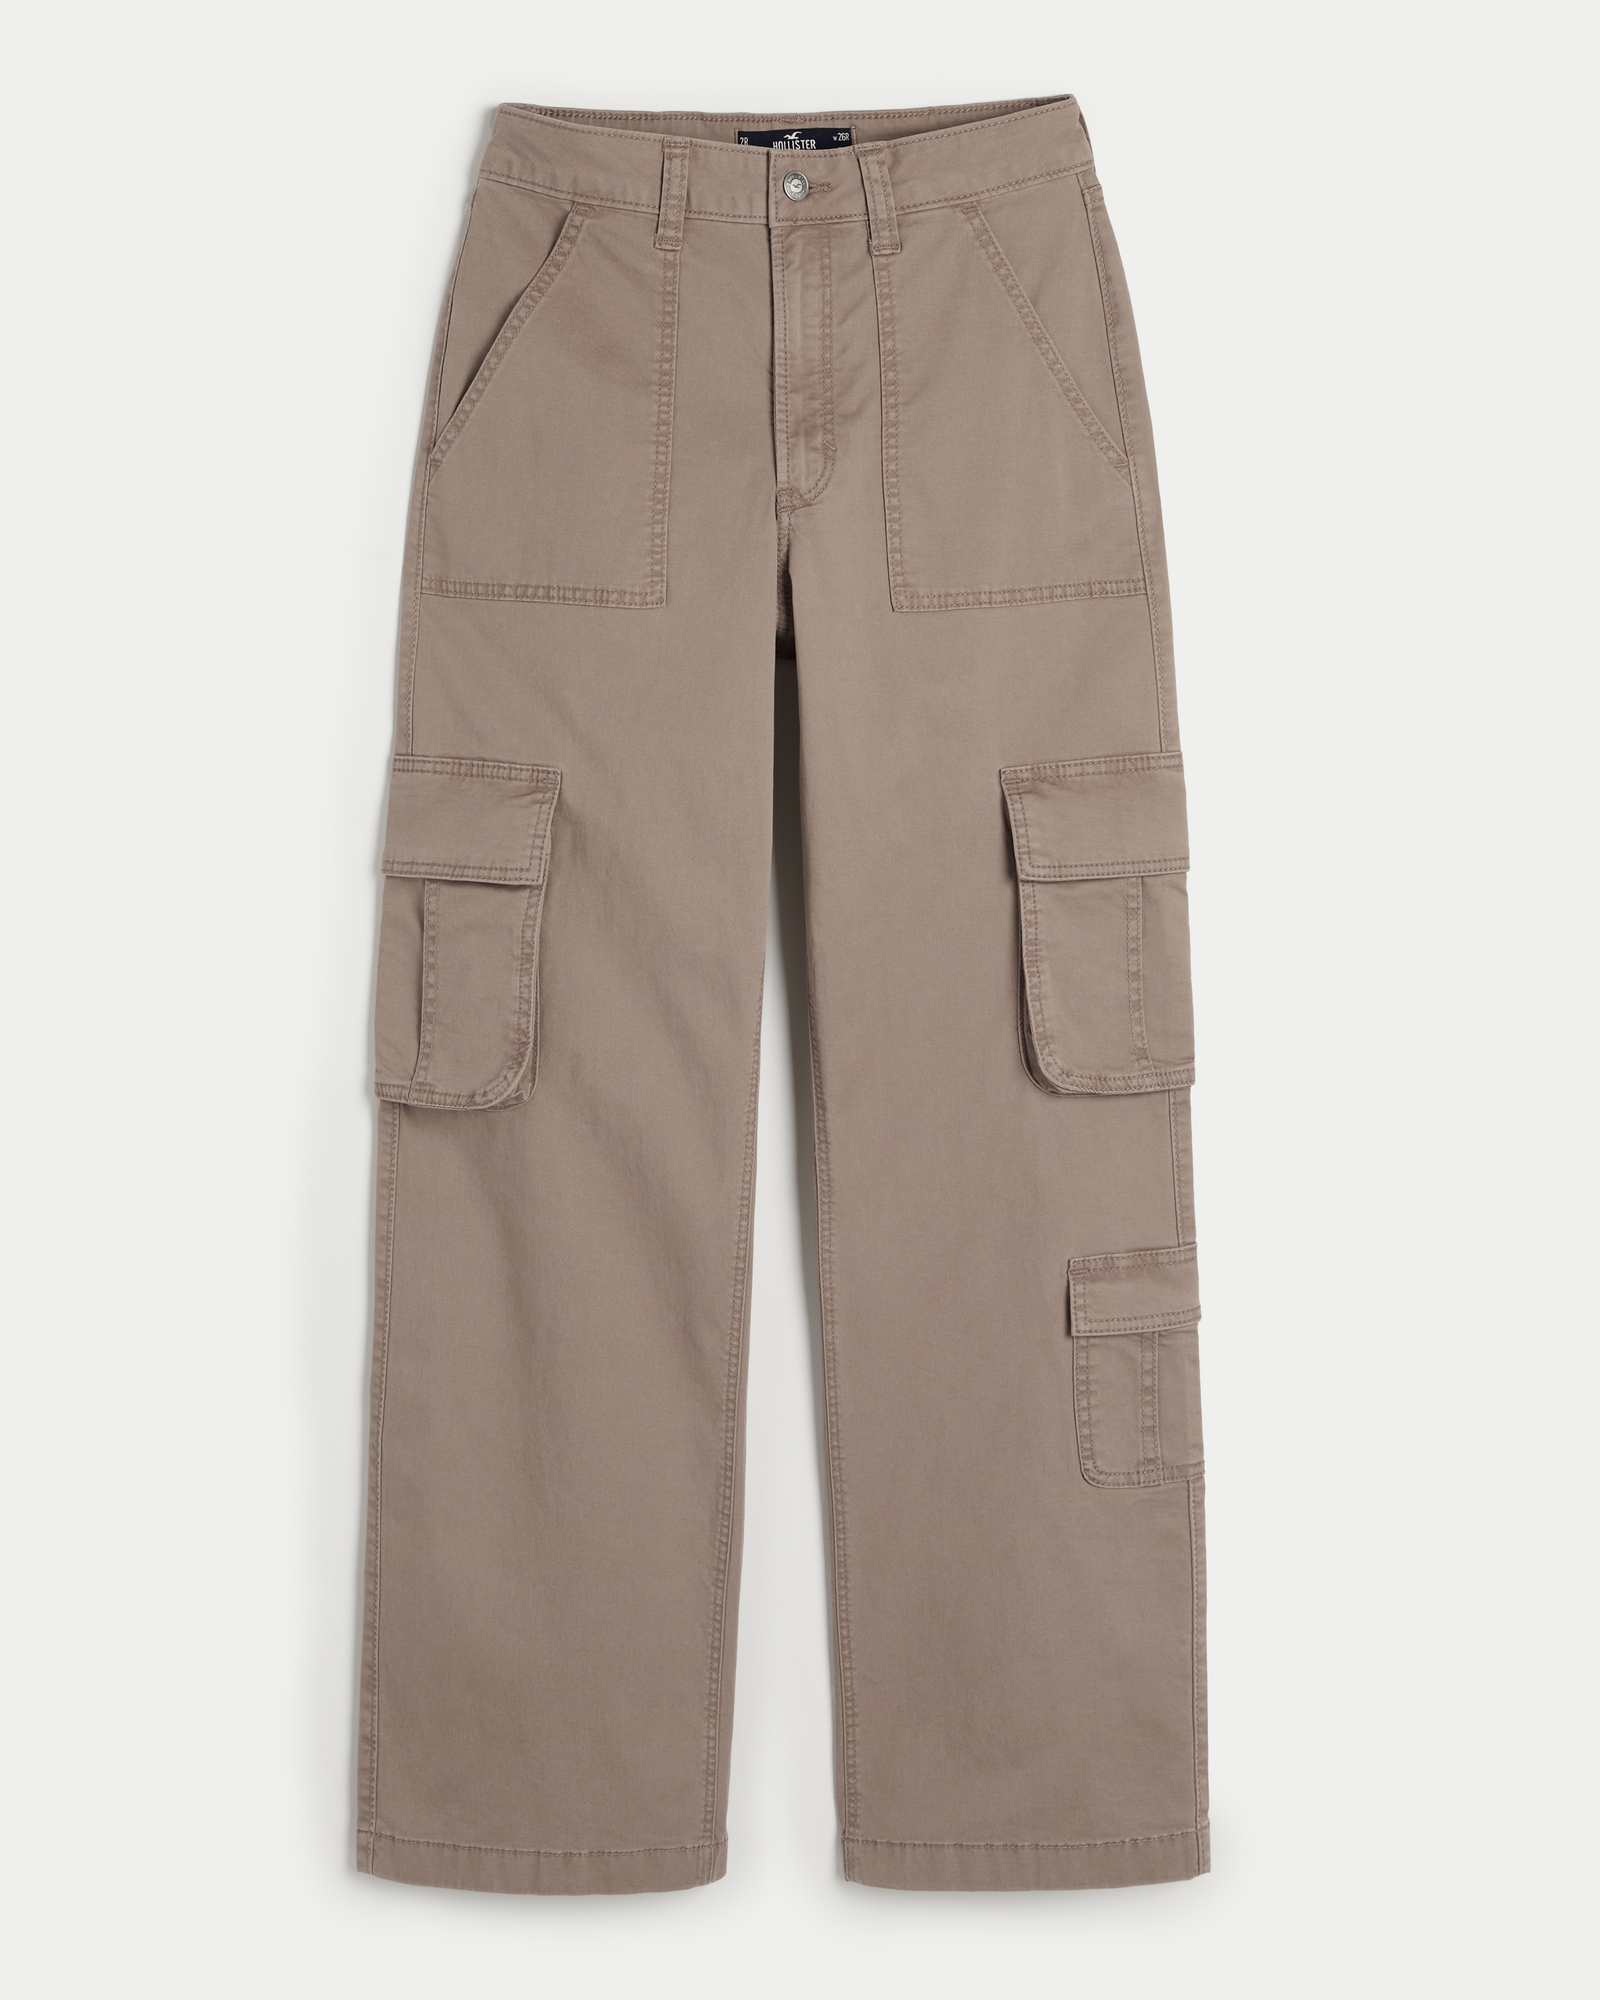 Hollister Cargo Pants - Size Medium for Sale in Del Valle, TX - OfferUp